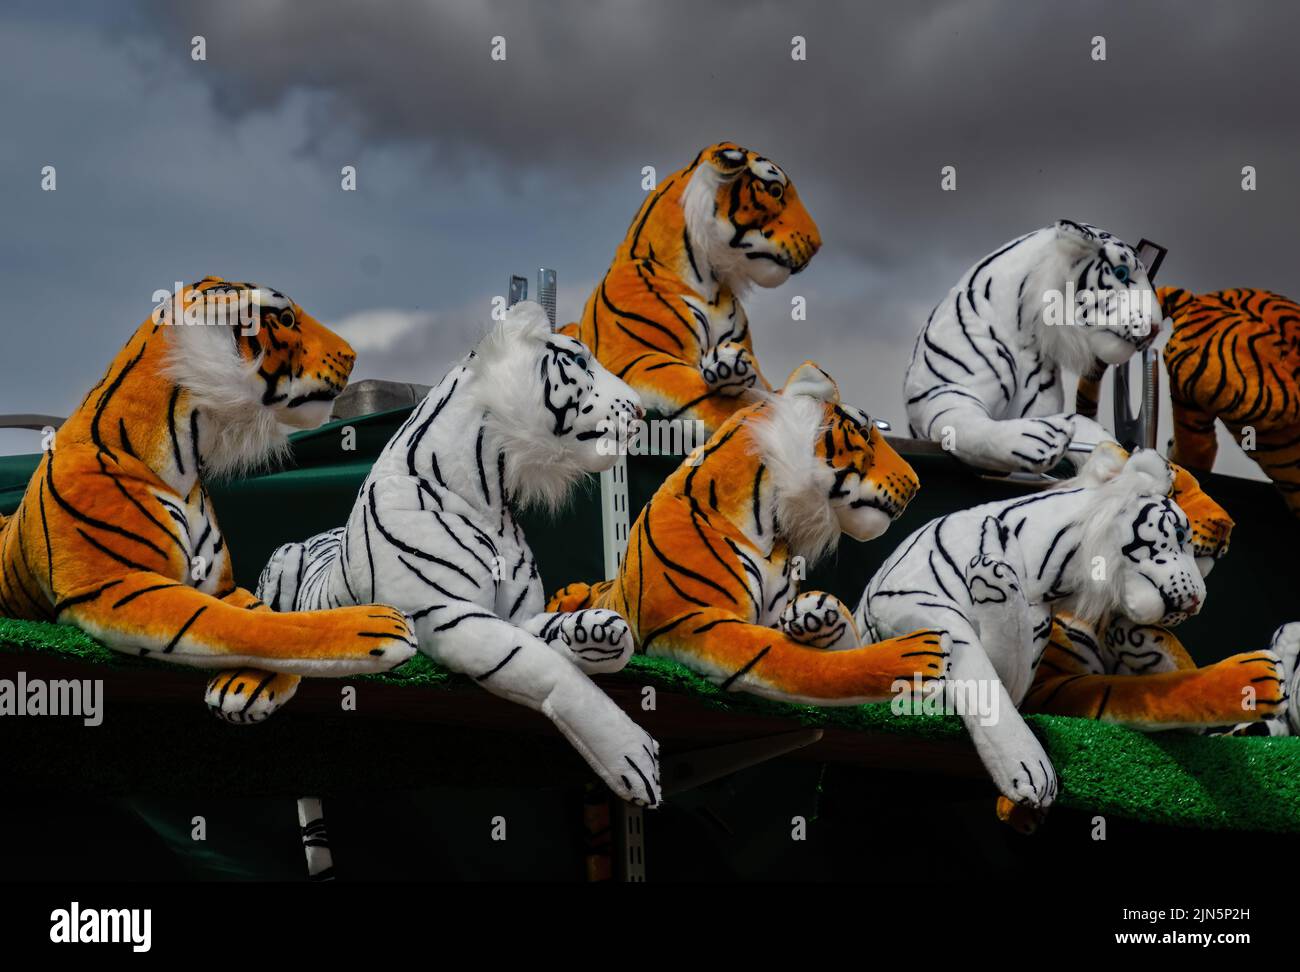 surreal toy tigers at fairground stall Stock Photo